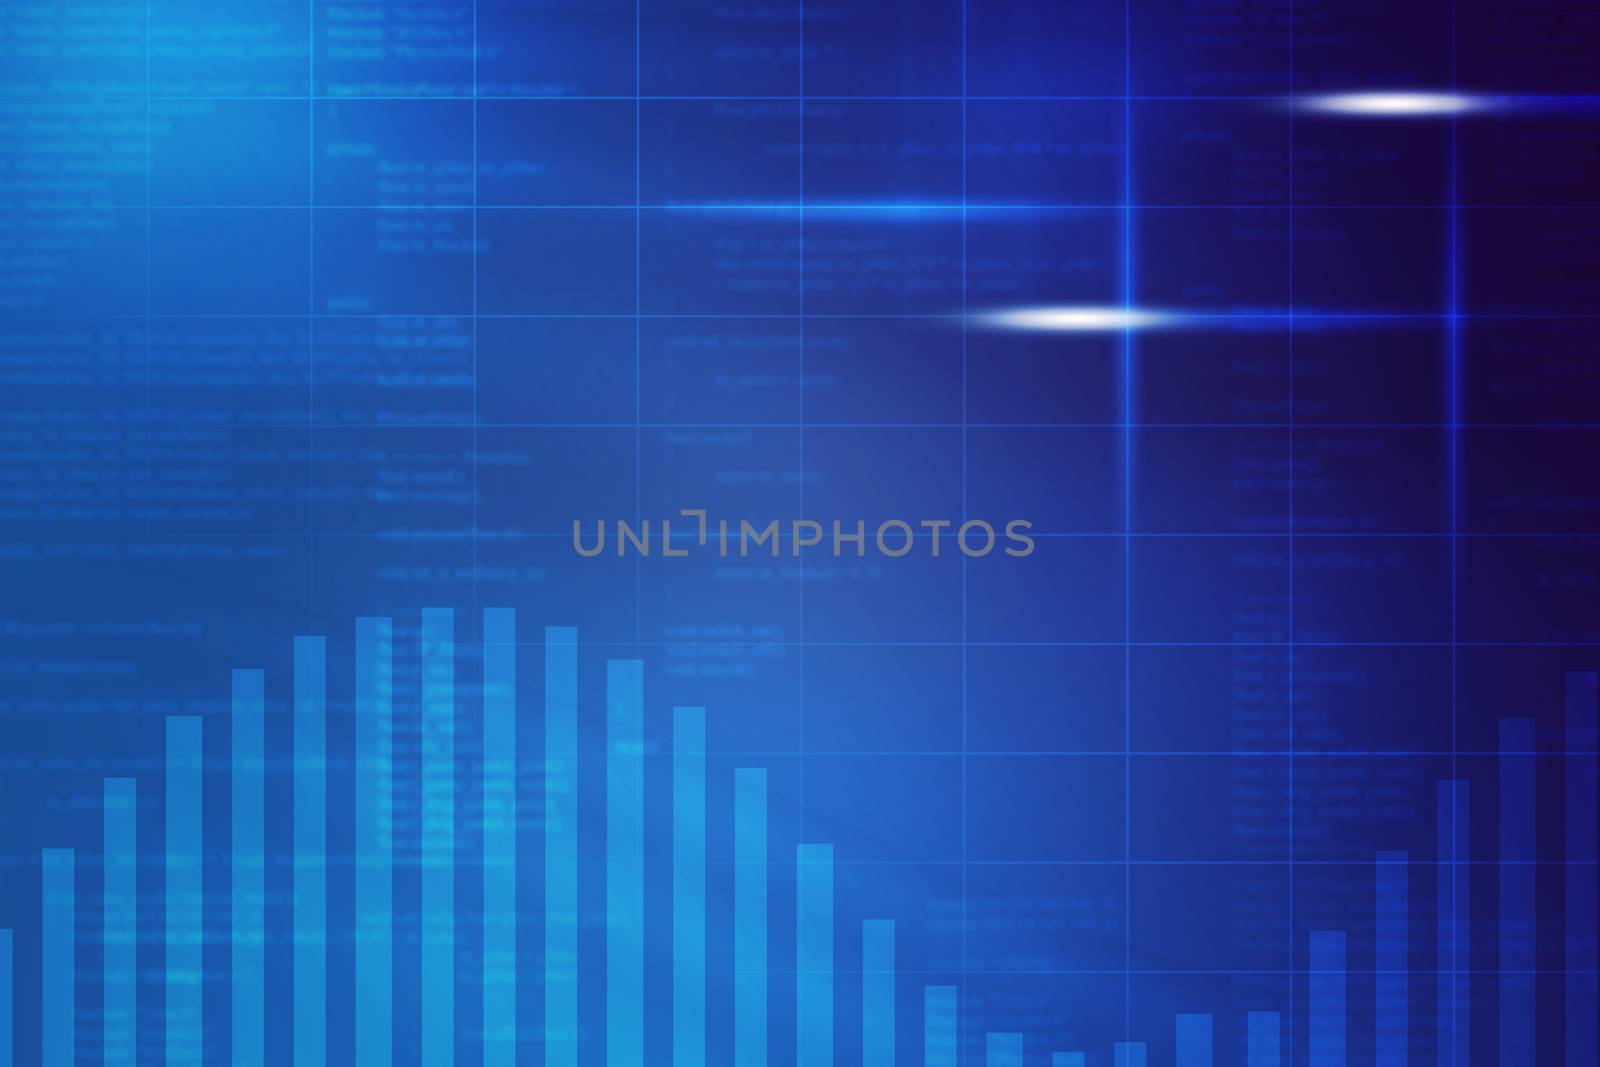 Abstract blue background with graphs and words